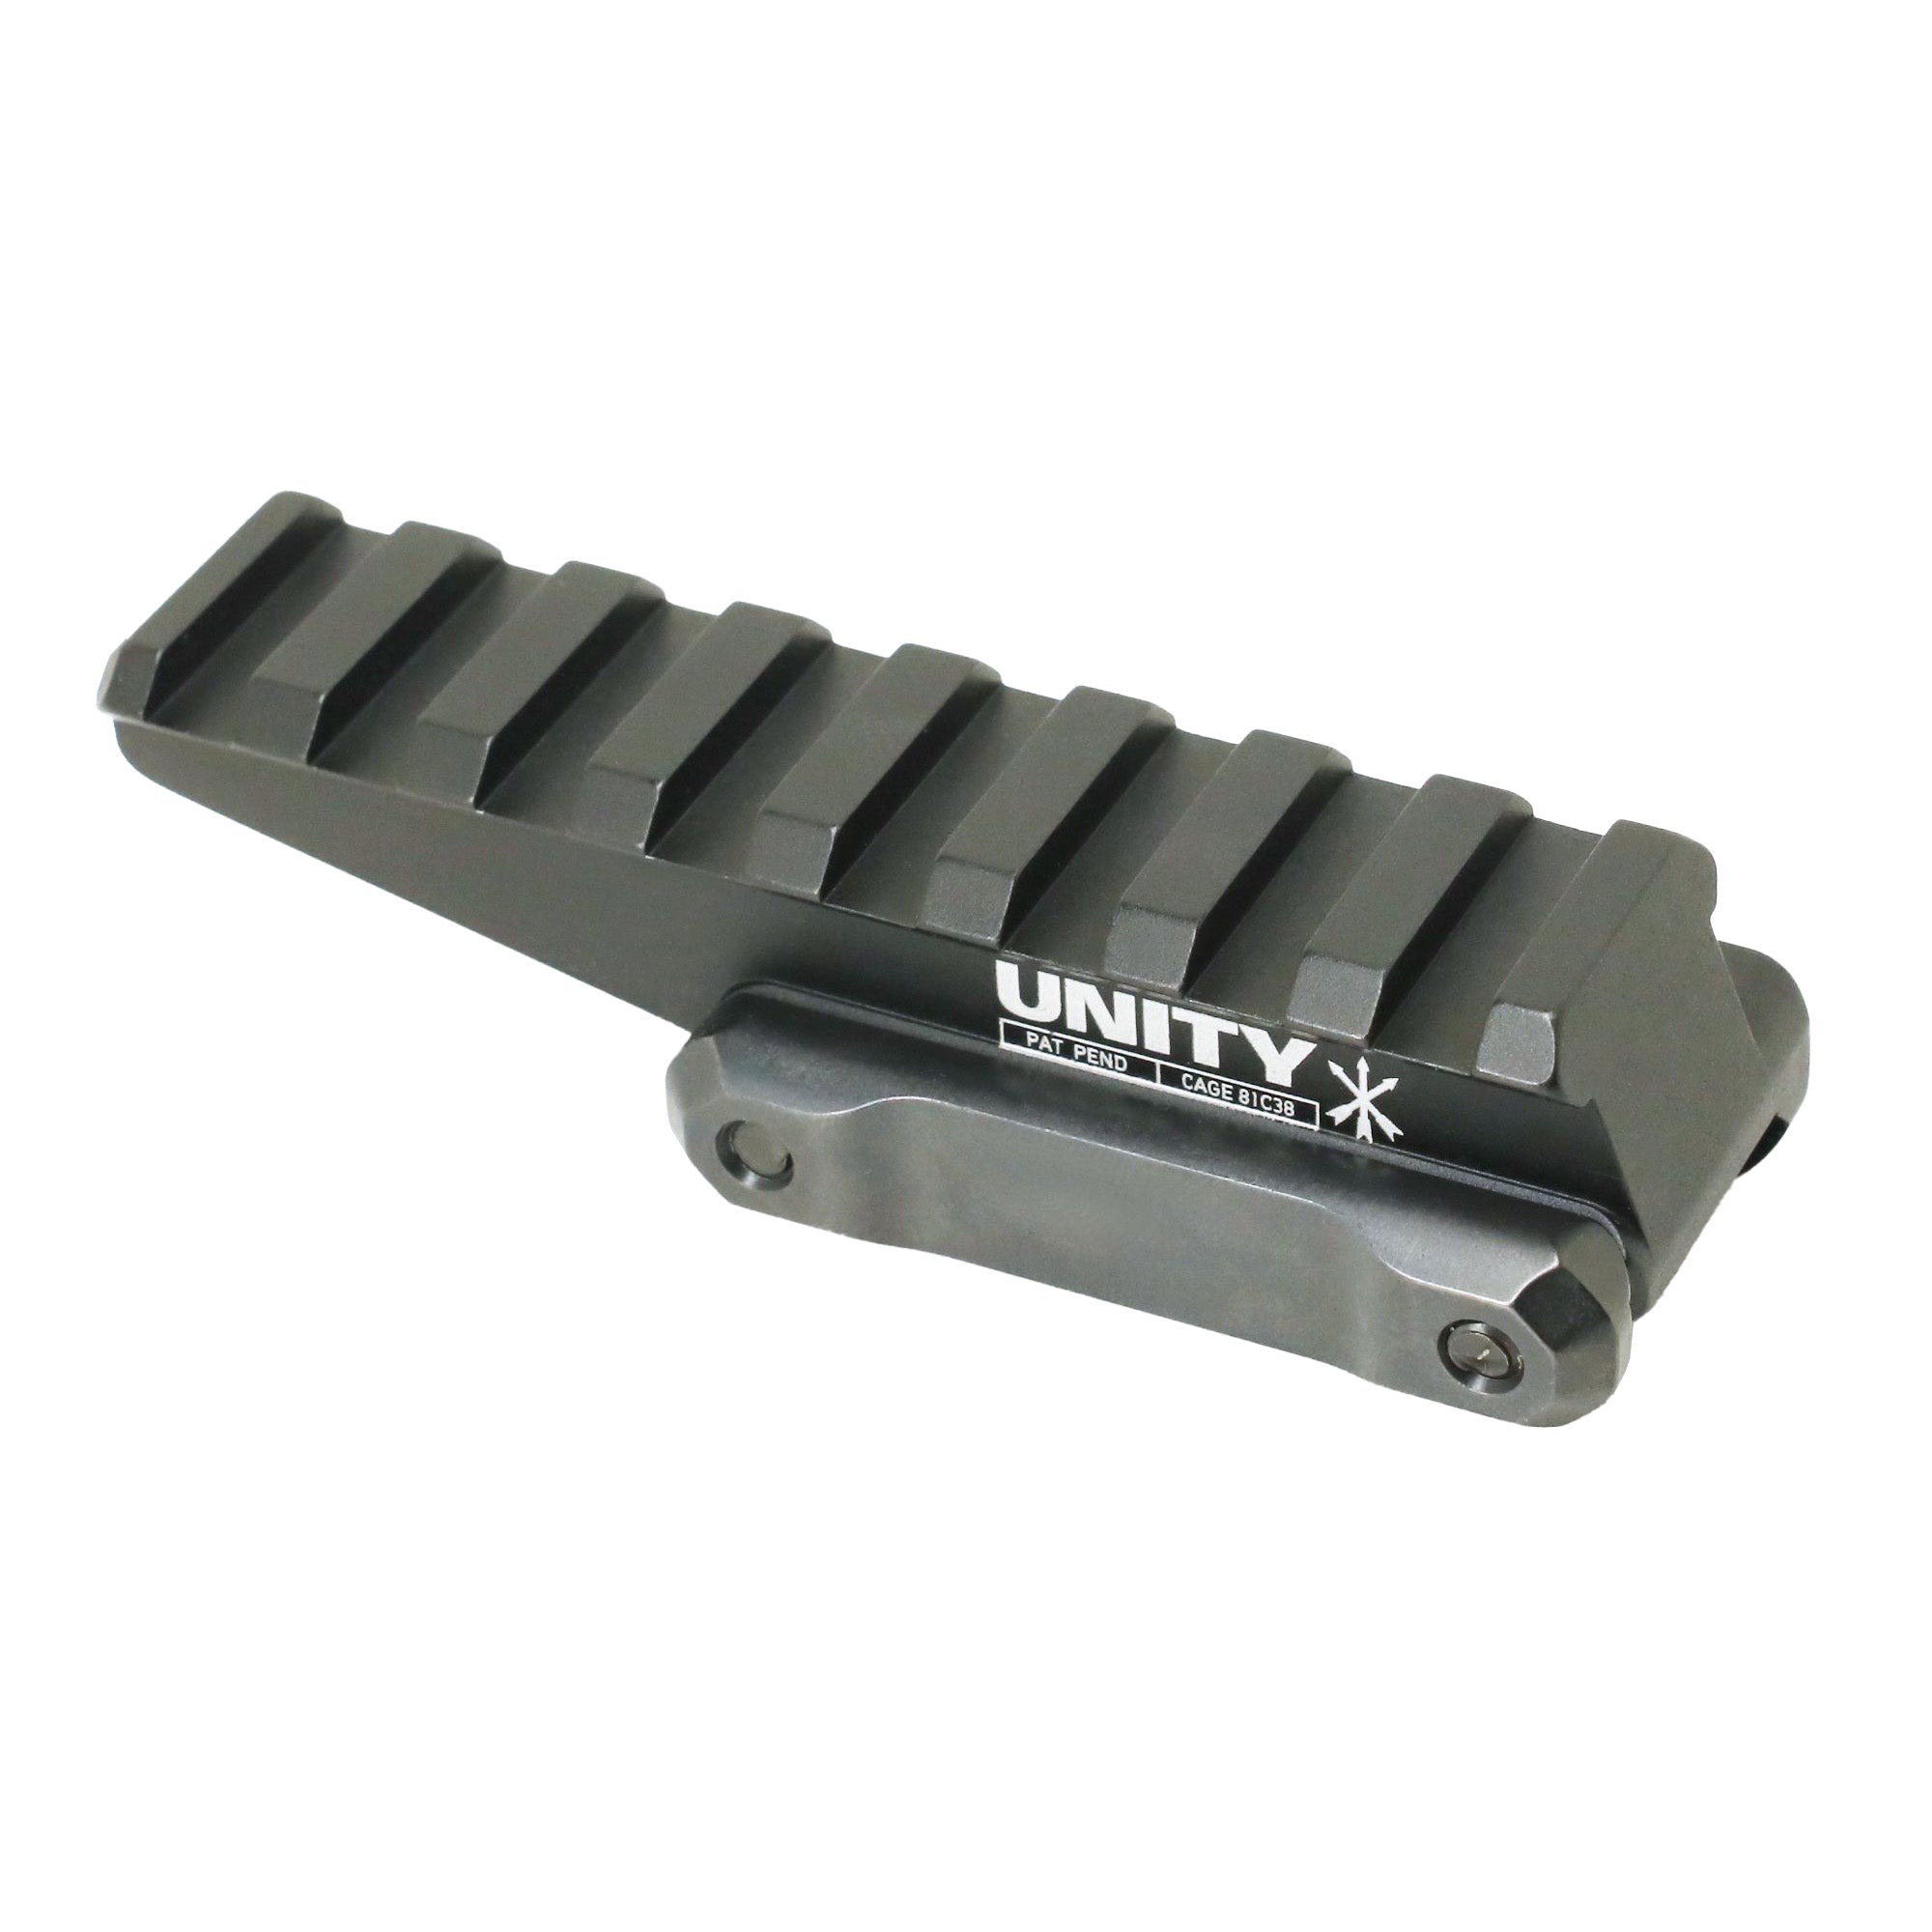 Unity Tactical FAST Red Dot Riser mounted on a Picatinny rail, enhancing sight alignment with a 2.26-inch optical height, in black anodized finish.